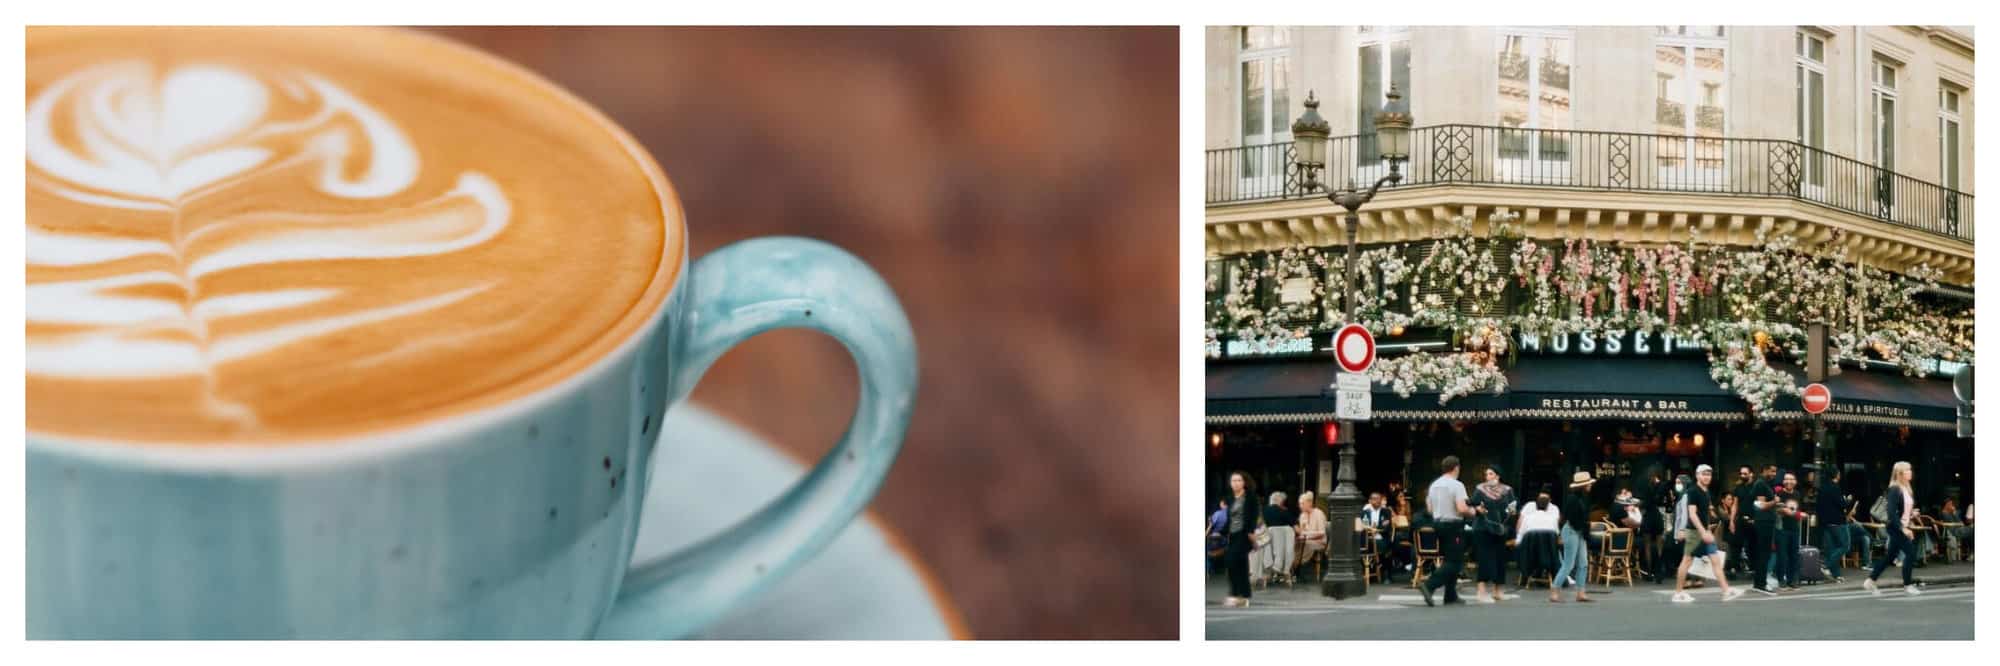 Left: an upclose photo of a latte in a blue mug; Right: the exterior of a cafe in Paris decorated with flowers on its walls and many people sat on the terrace as well as pedestrians passing by. 